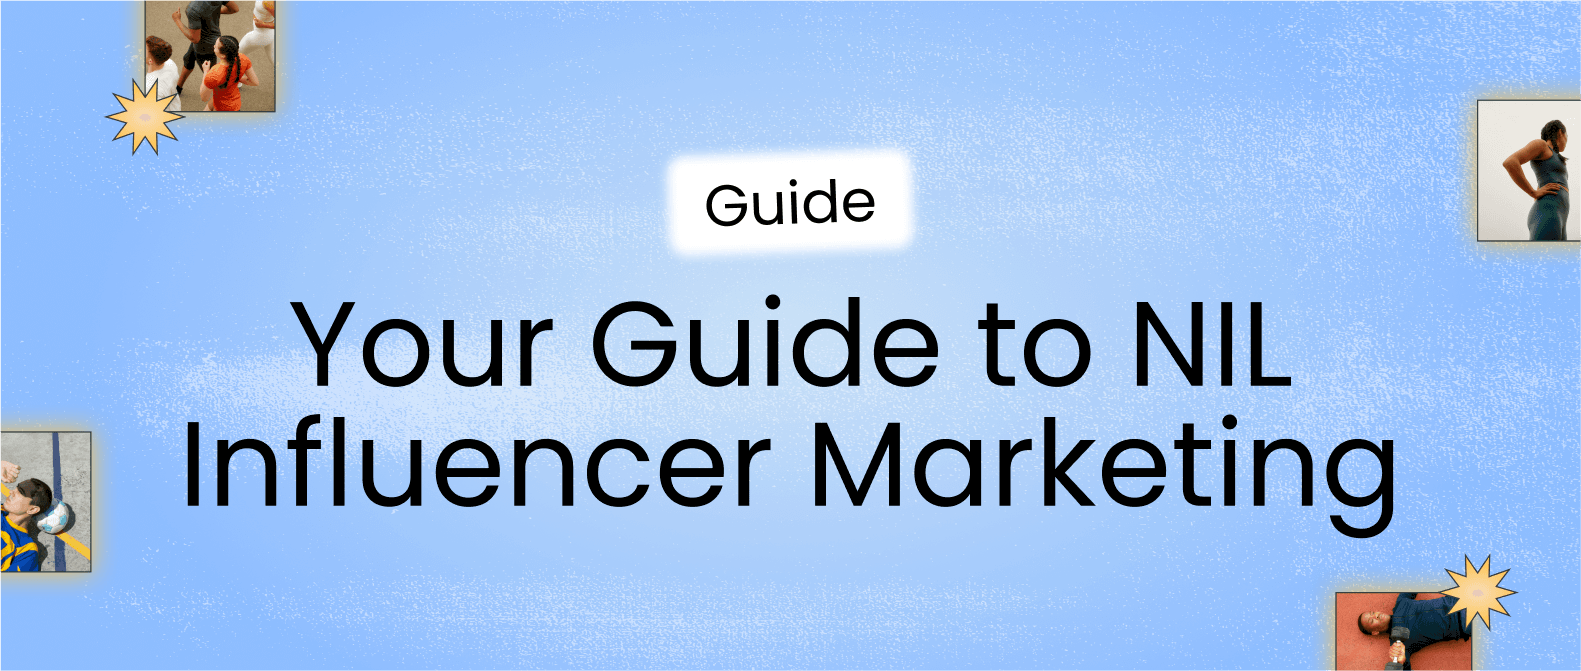 Free NIL influencer marketing guide for brand marketers